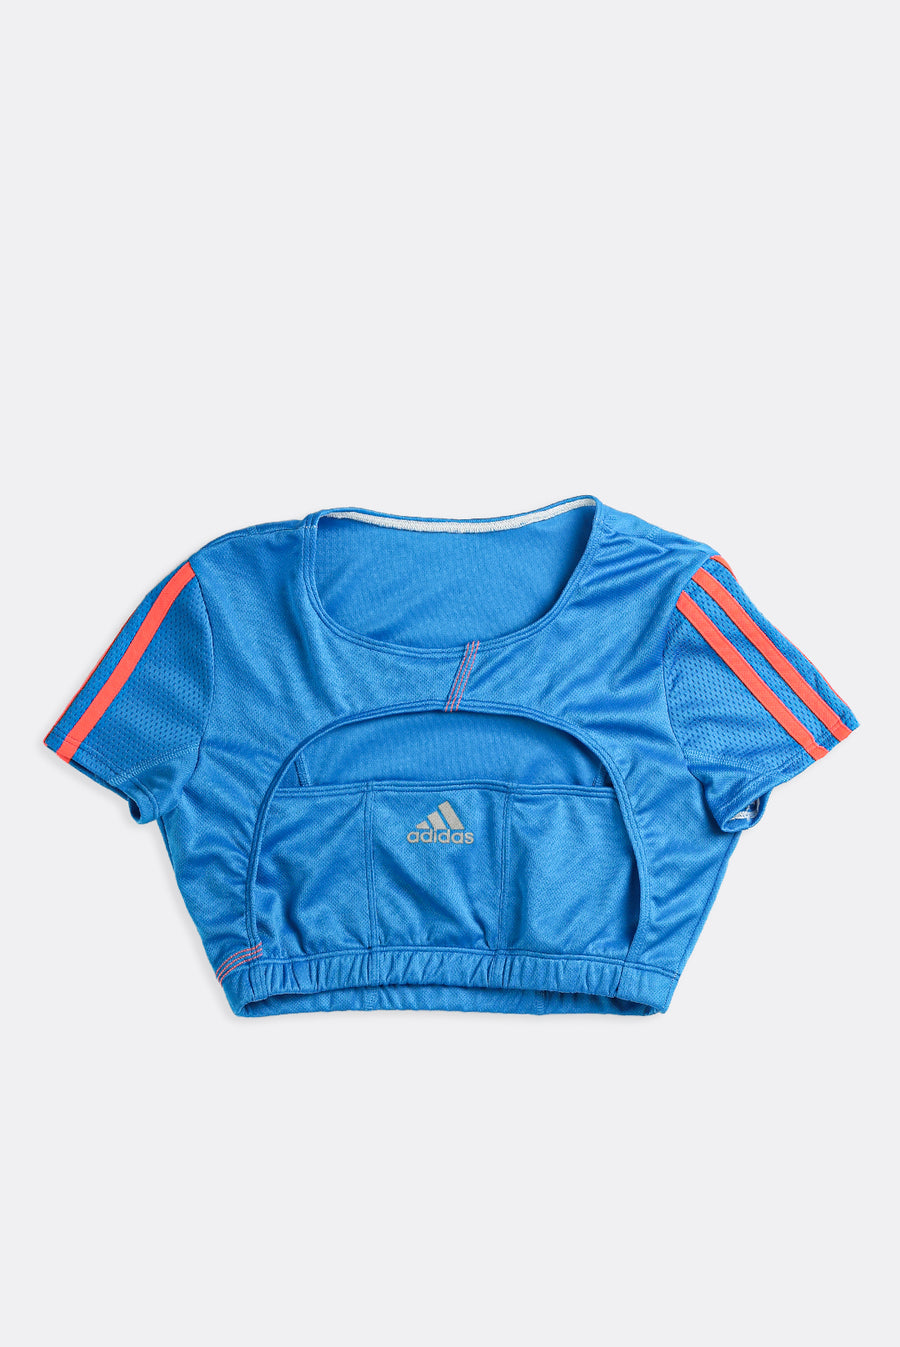 Rework Adidas Athletic Cut Out Tee - M